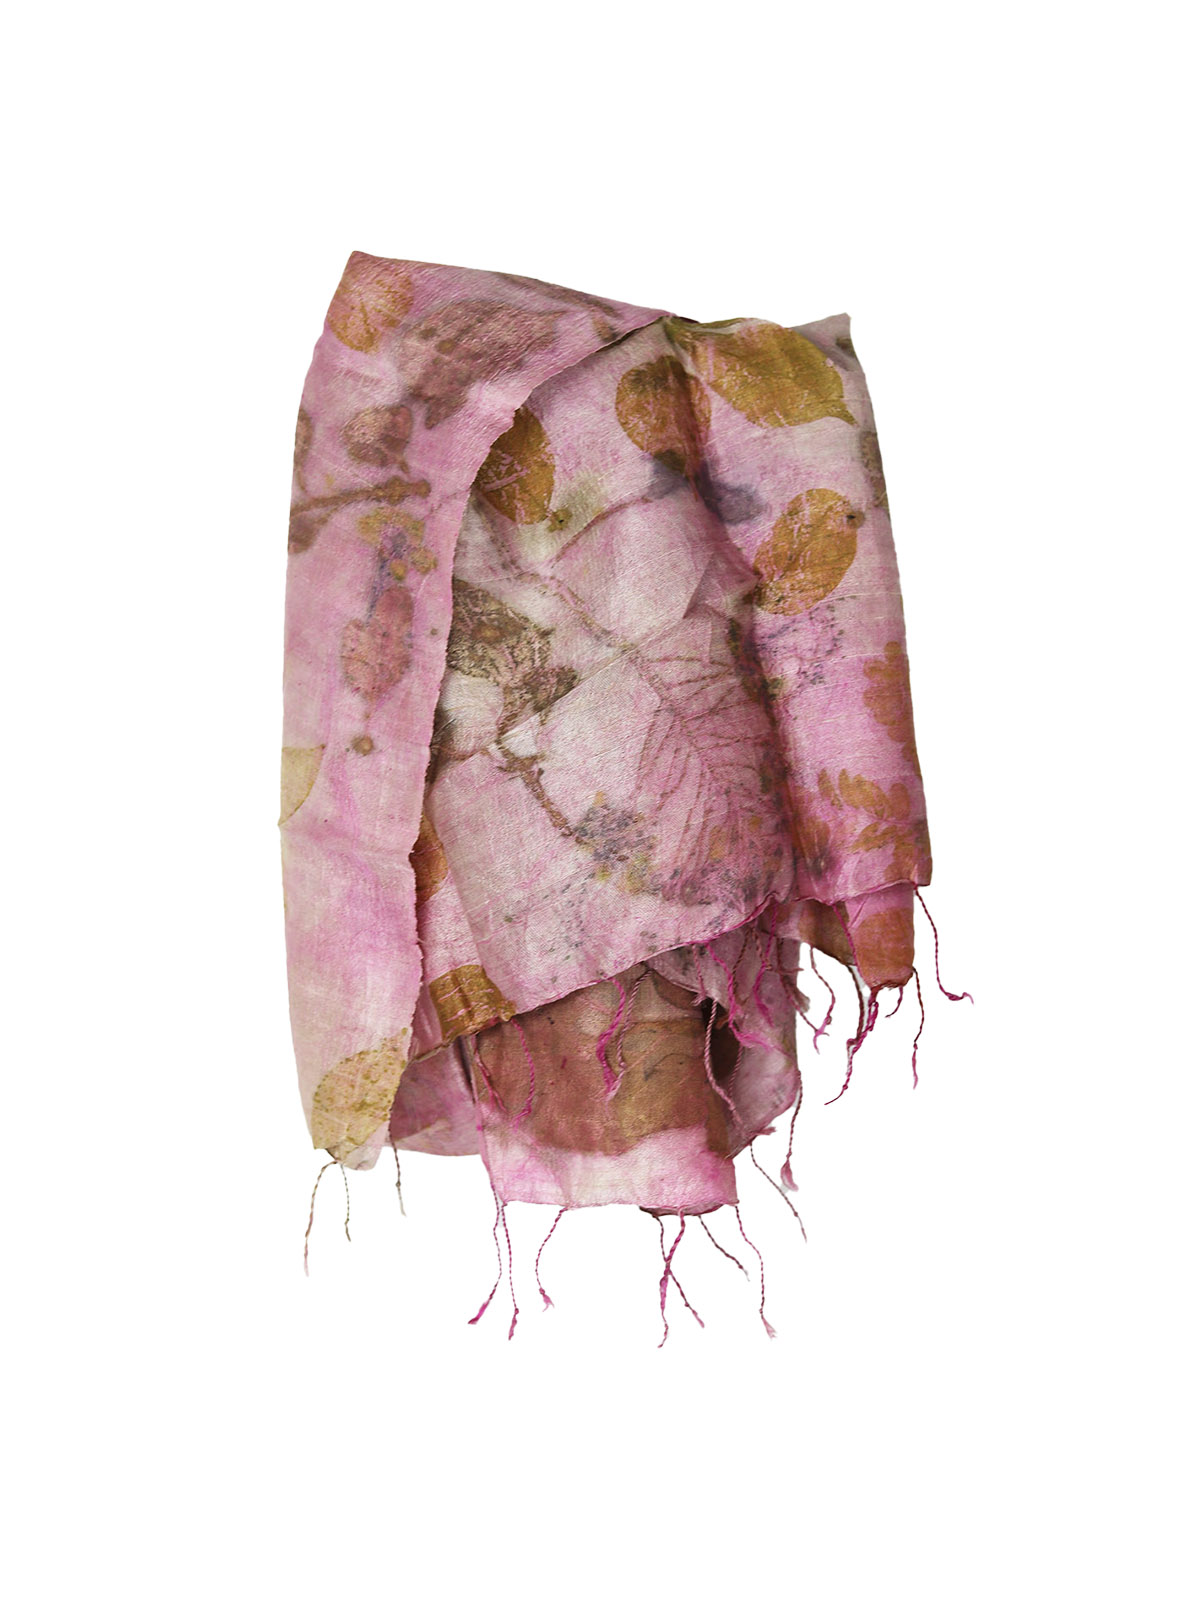 Silk Scarf - Handwoven and hand-dyed - (h)A.N.D. - Handmade in Cambodia - Mitzie Mee Shop